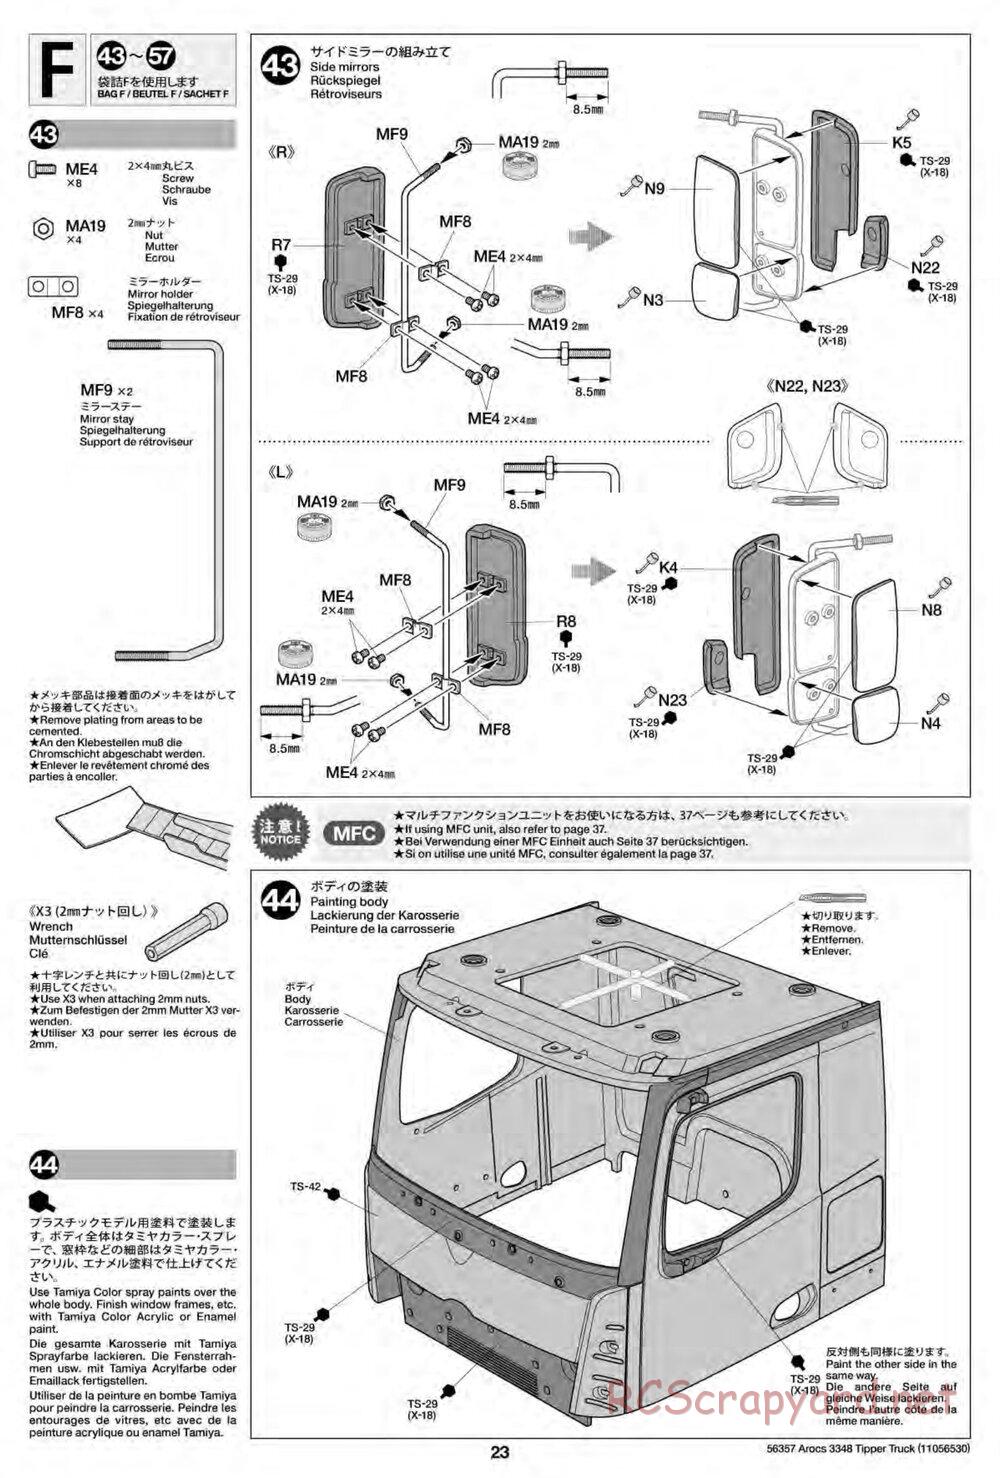 Tamiya - Mercedes-Benz Arocs 3348 6x4 Tipper Truck Chassis - Manual - Page 23